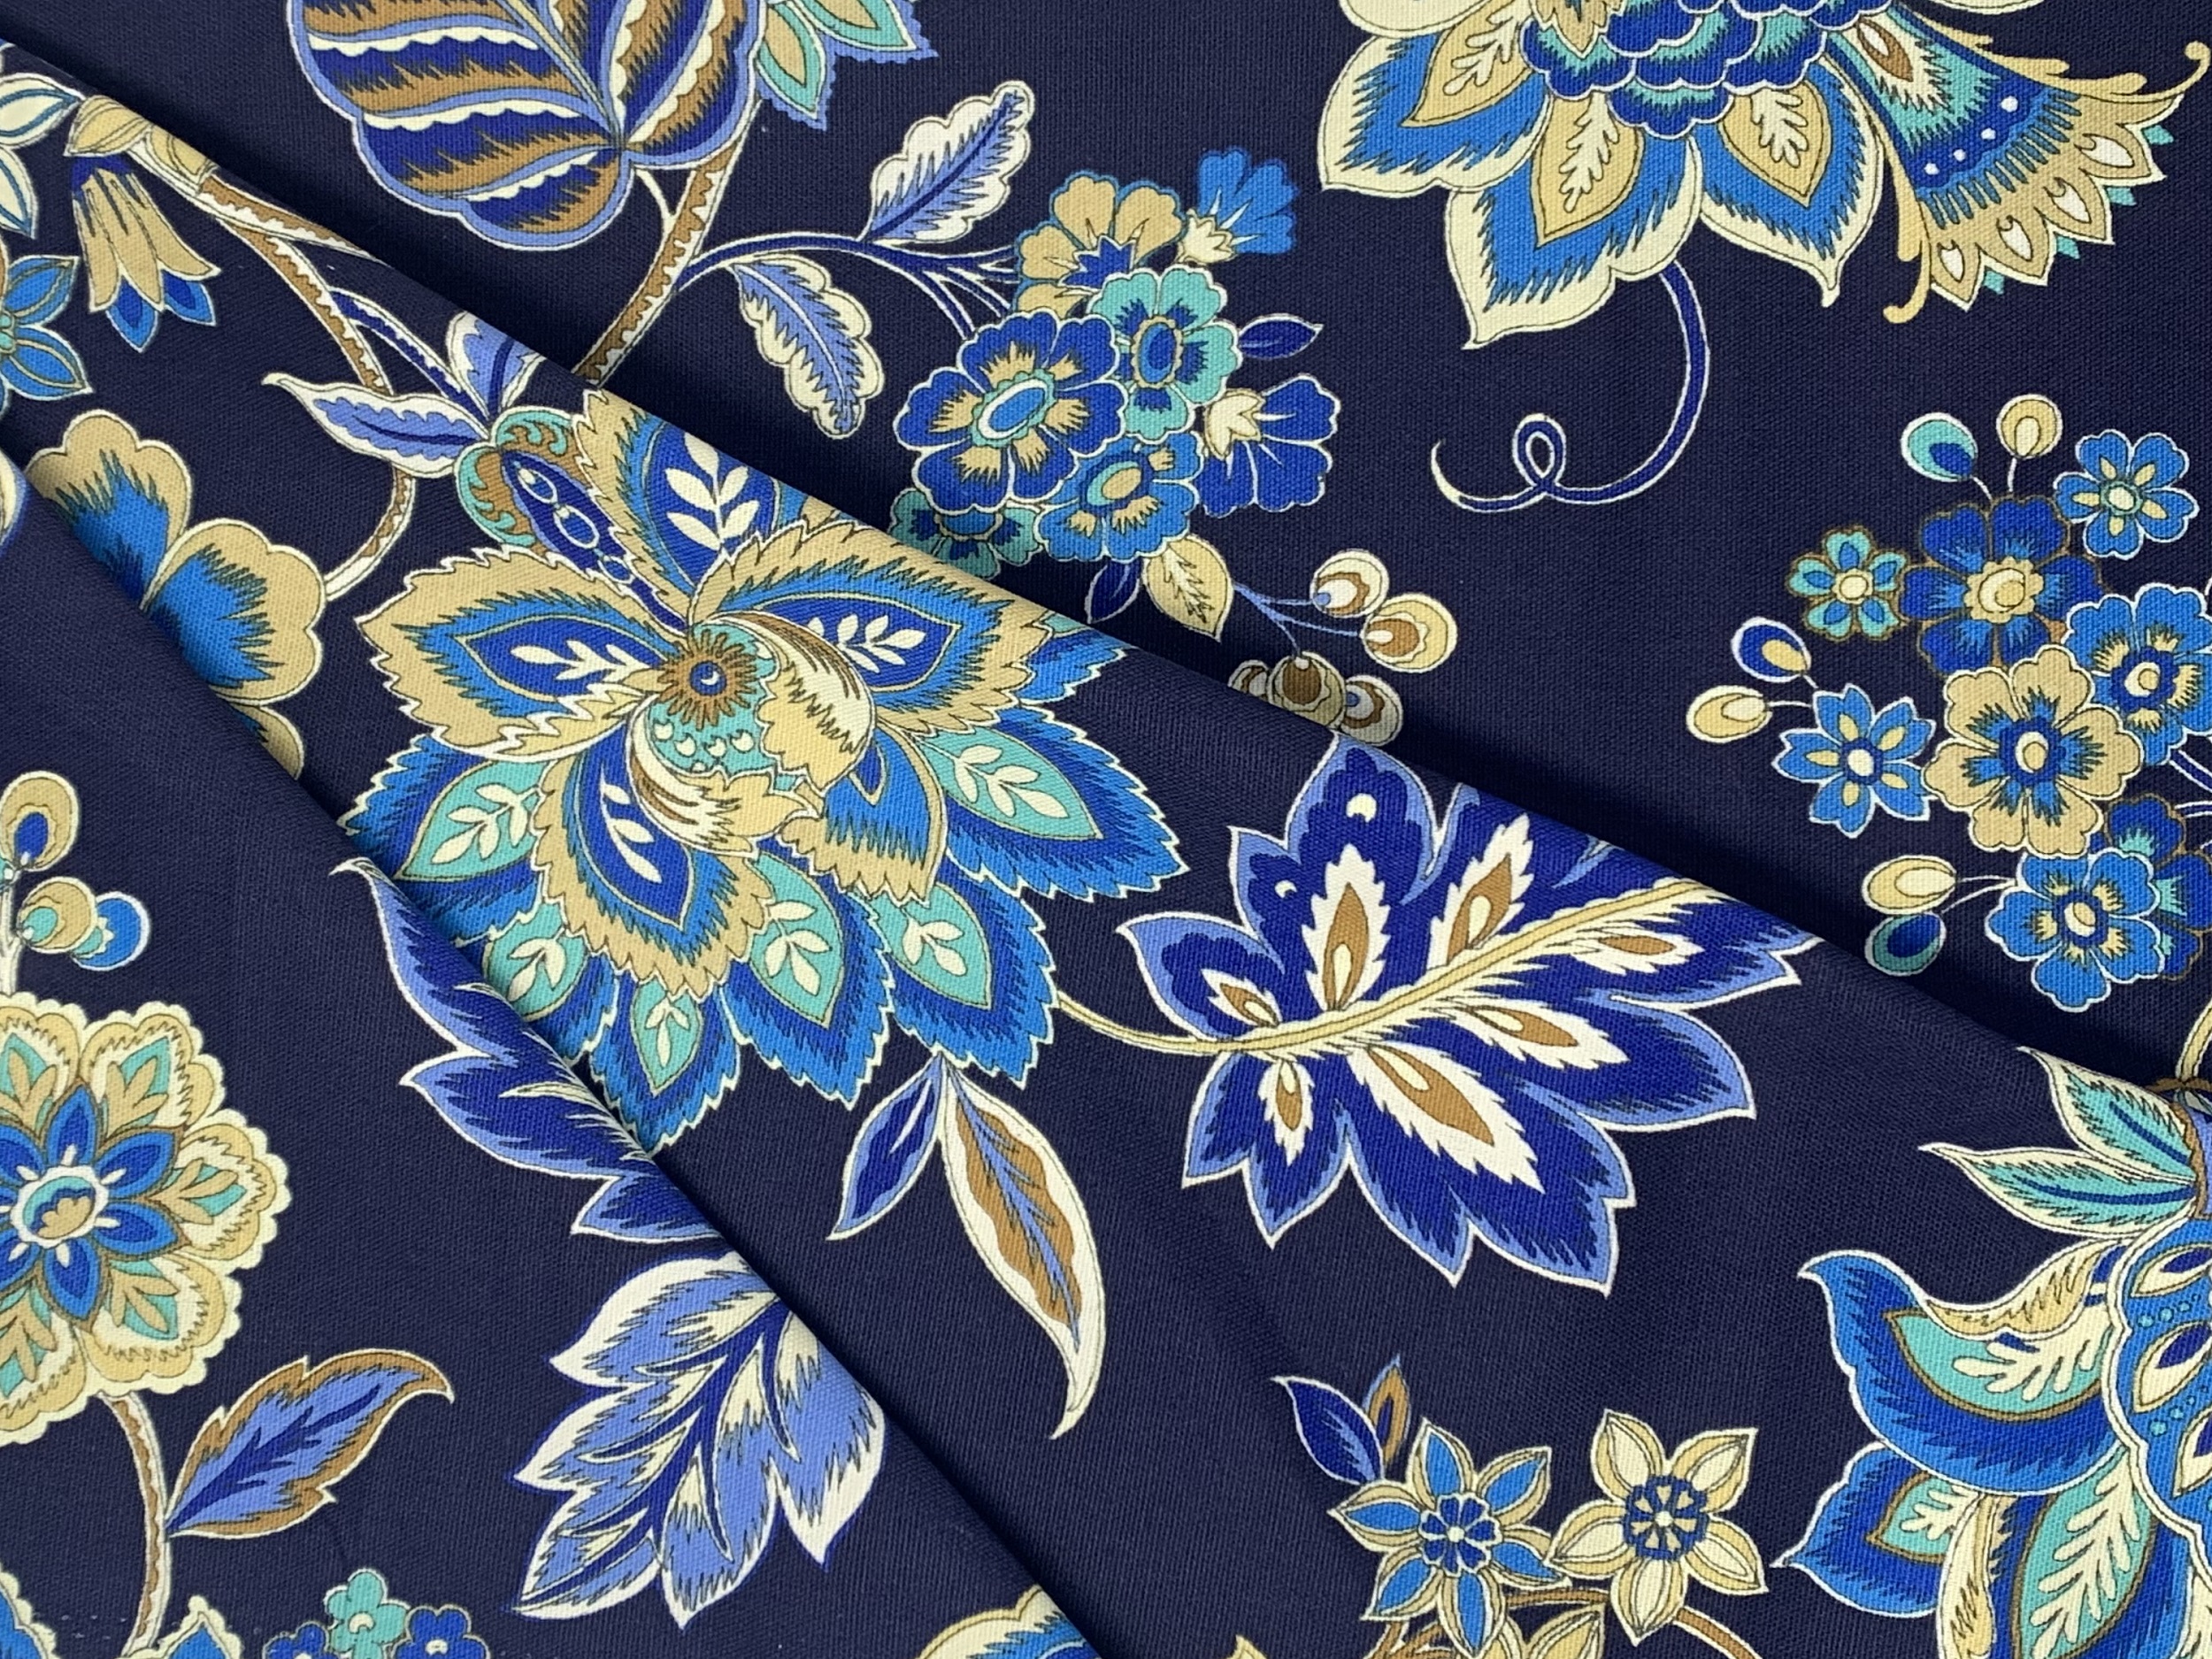 Waverly Inspirations 45" 100% Cotton Printed Sewing & Craft Fabric By the Yard, Floral Blue - image 1 of 3